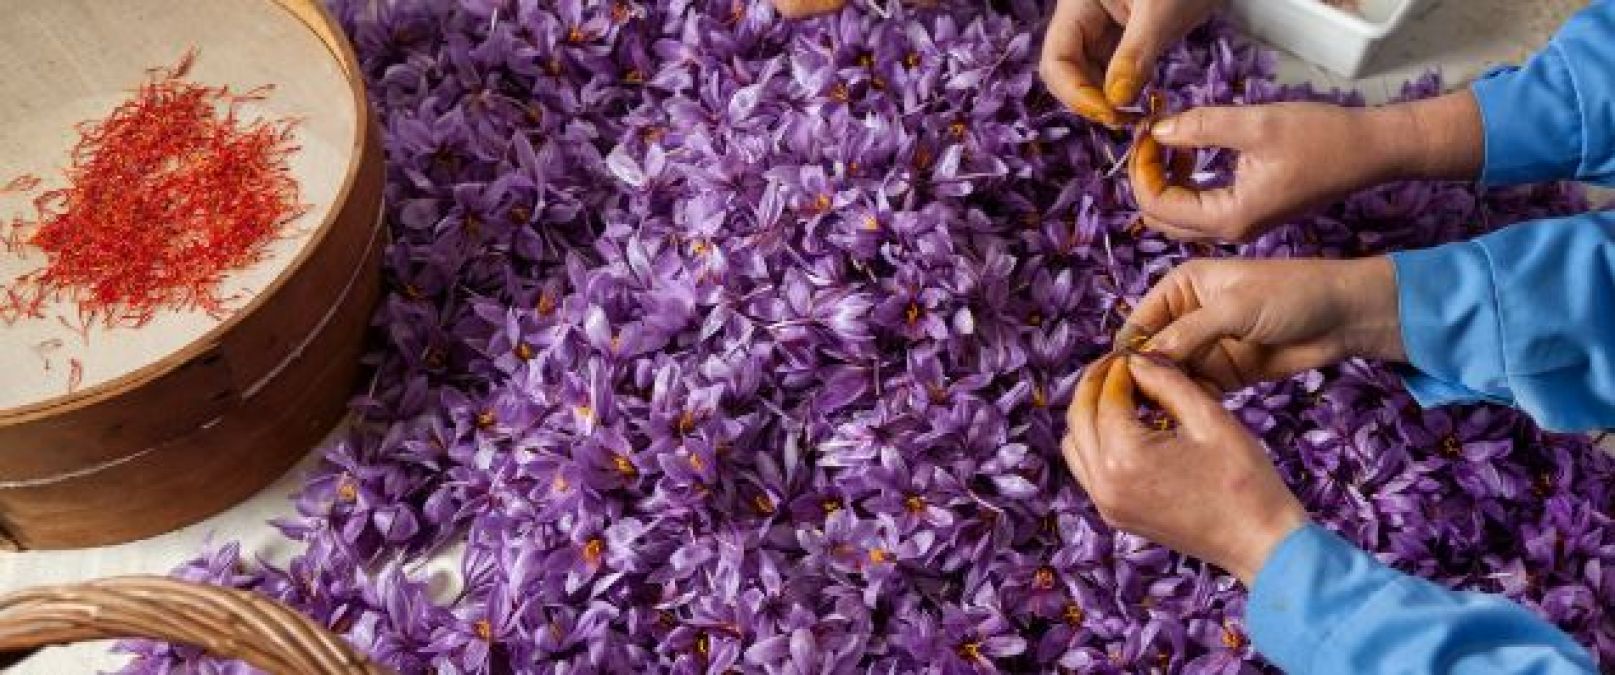 Saffron is a boon for men, get rid of these problems